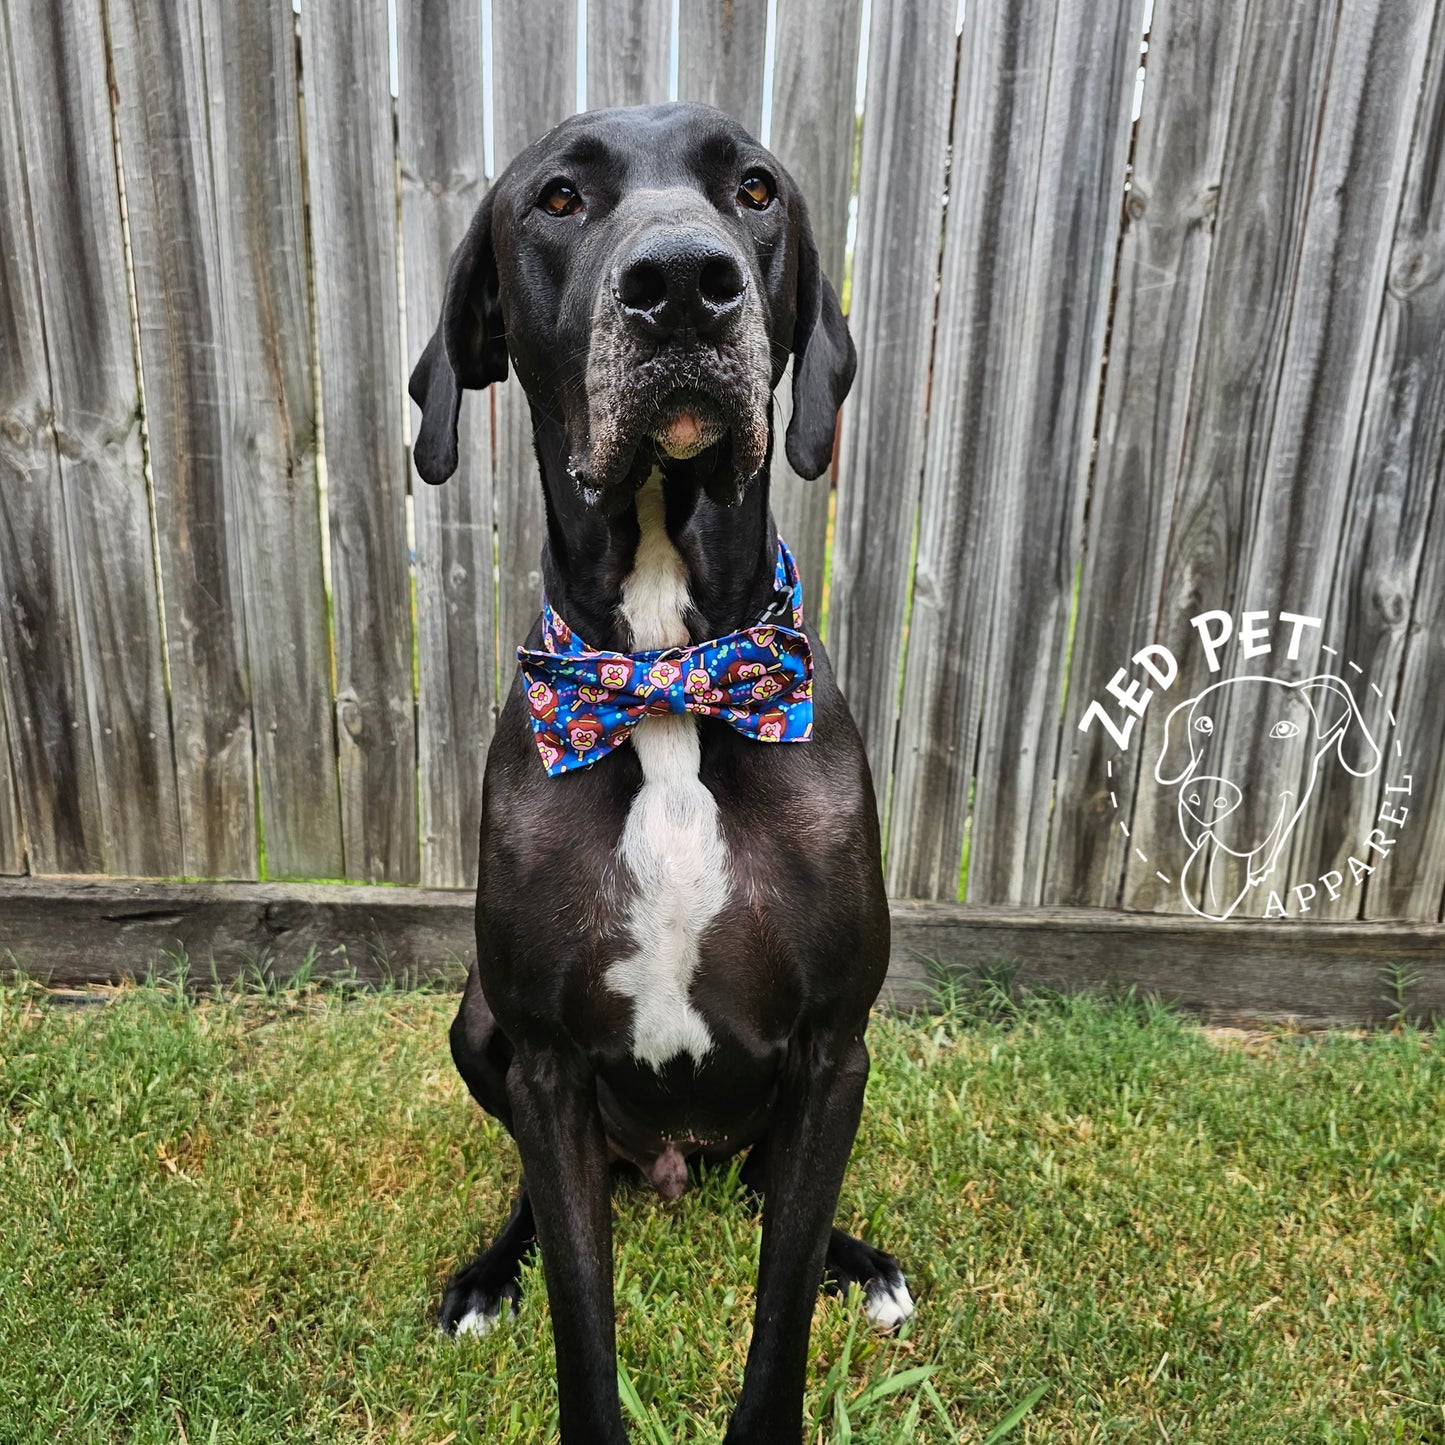 Black great dane with white chest wearing blue collar with bow tie and bubble o bill print